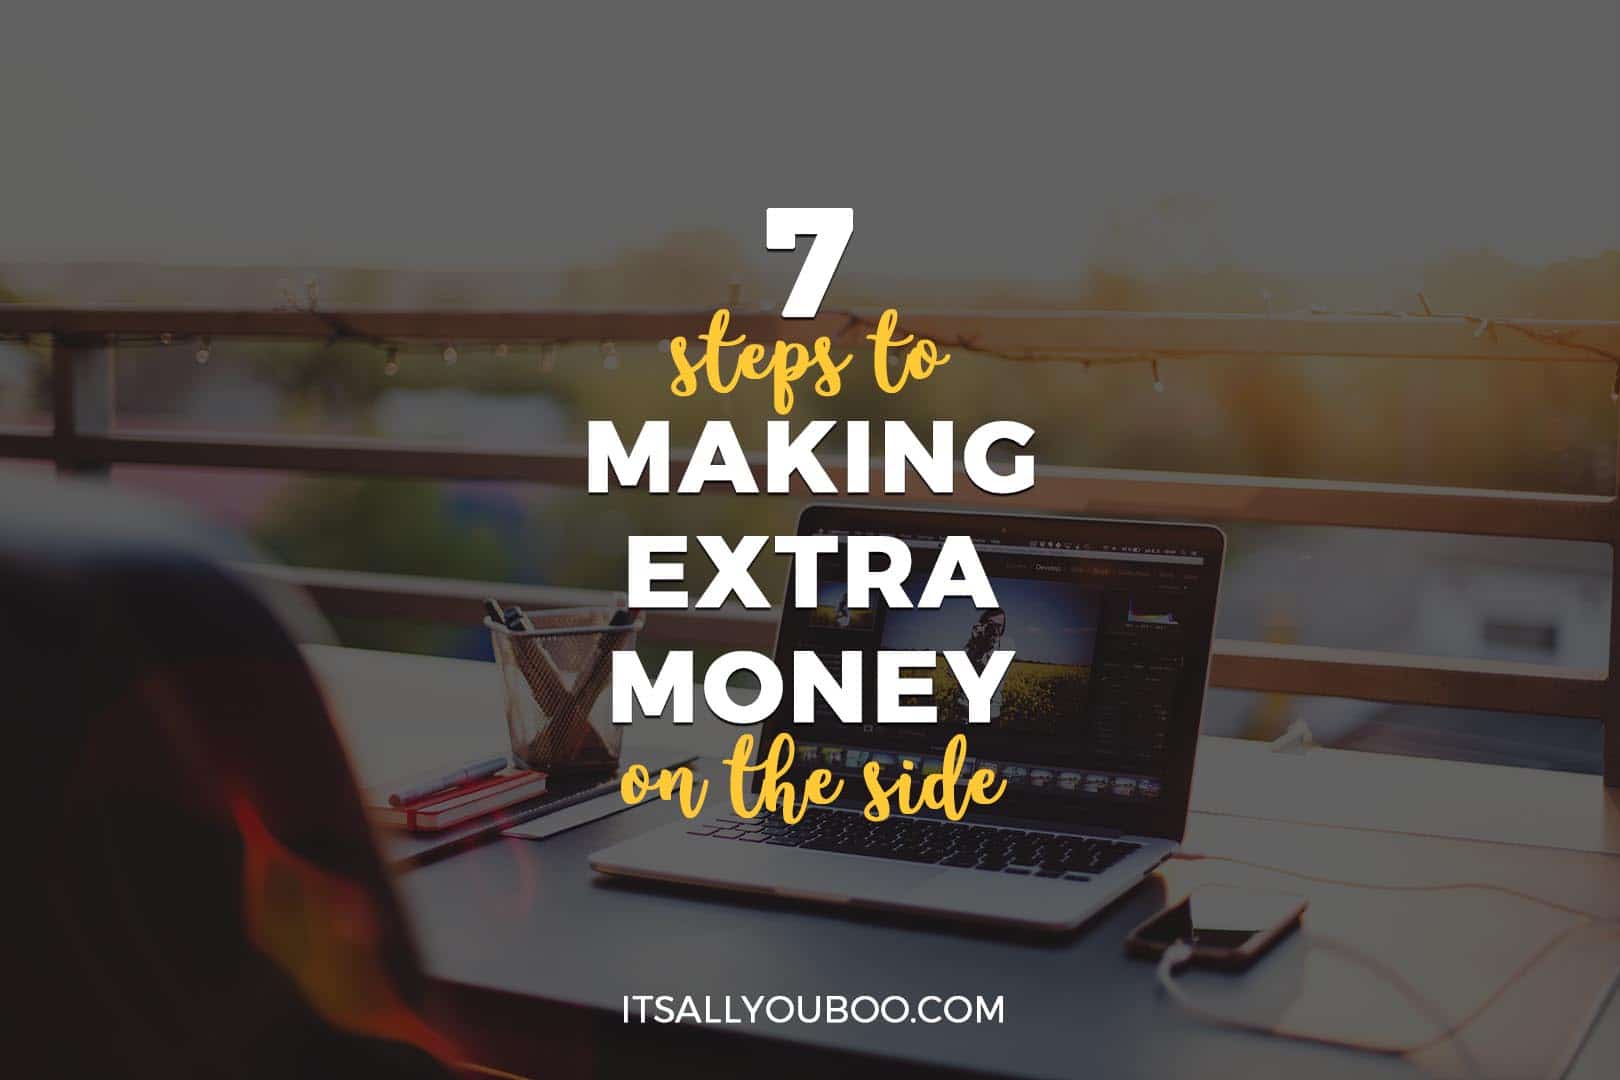 7 Steps to Making Extra Money on the Side